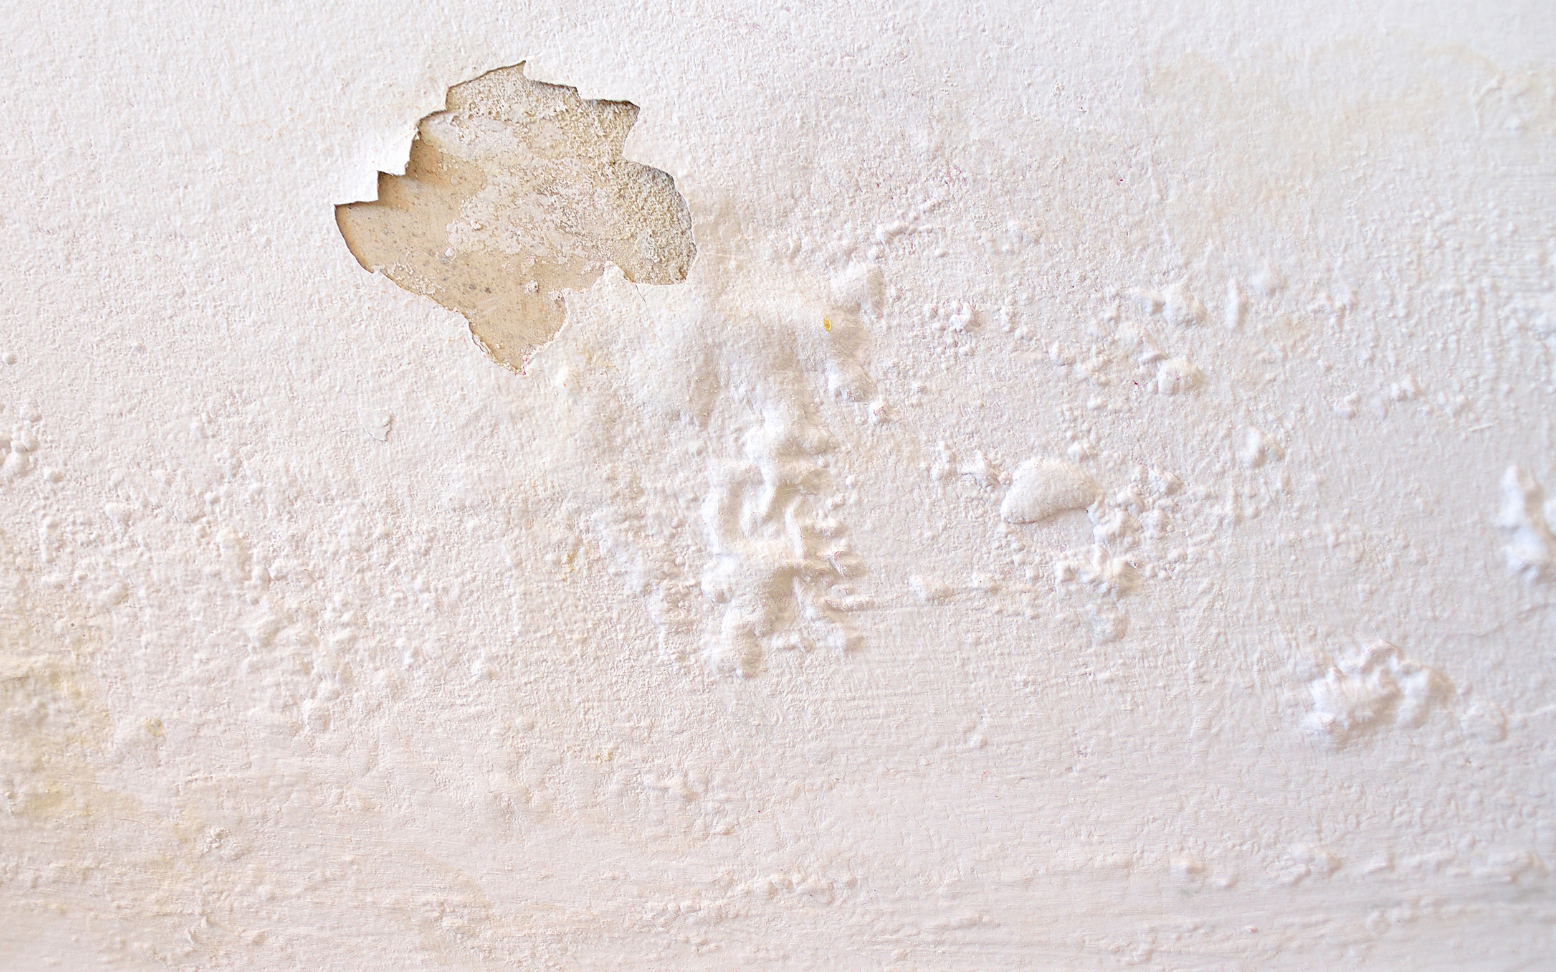 Ceiling panels are damaged due to moisture in the room from rainwater leakage.